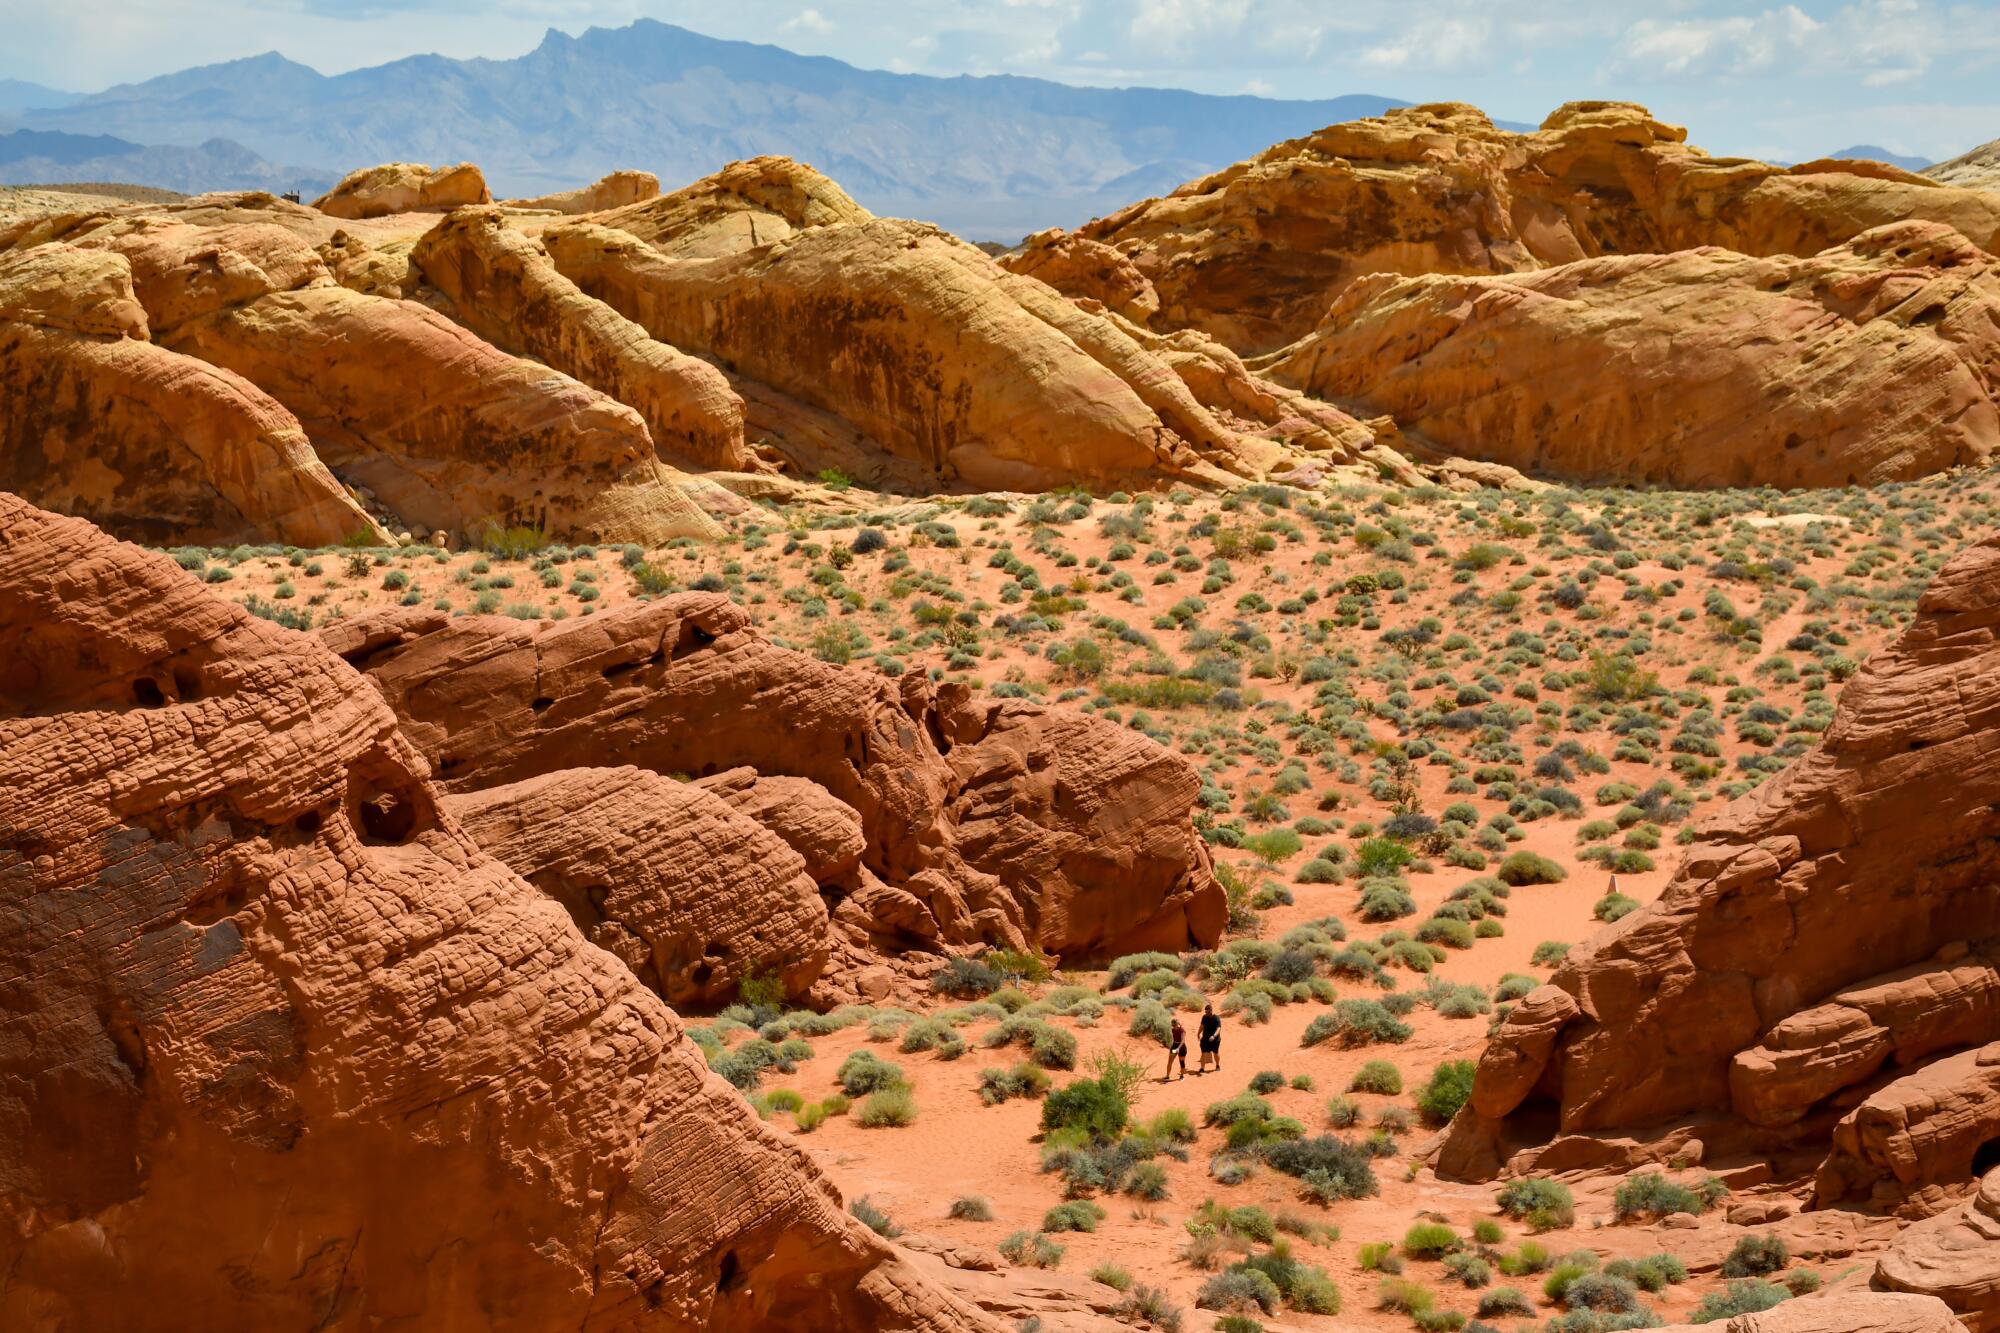 People appear tiny as they walk among reddish-orange boulders and dunes